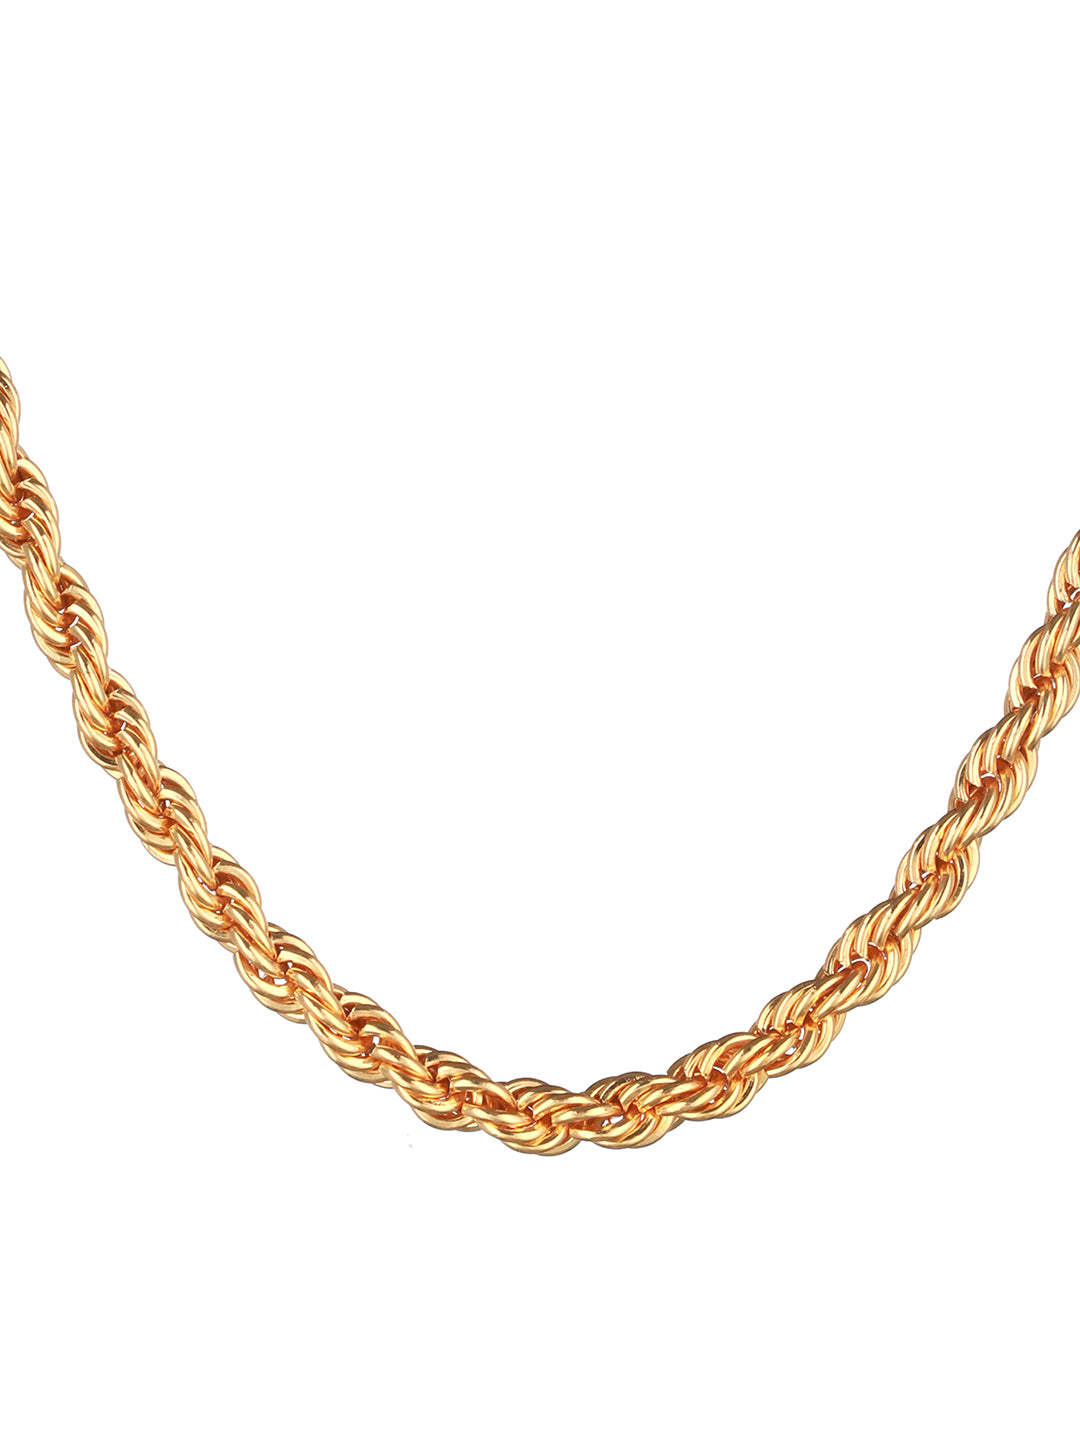 Bold by Priyaasi Trendy Gold-Toned Rope Neck Chain for Men